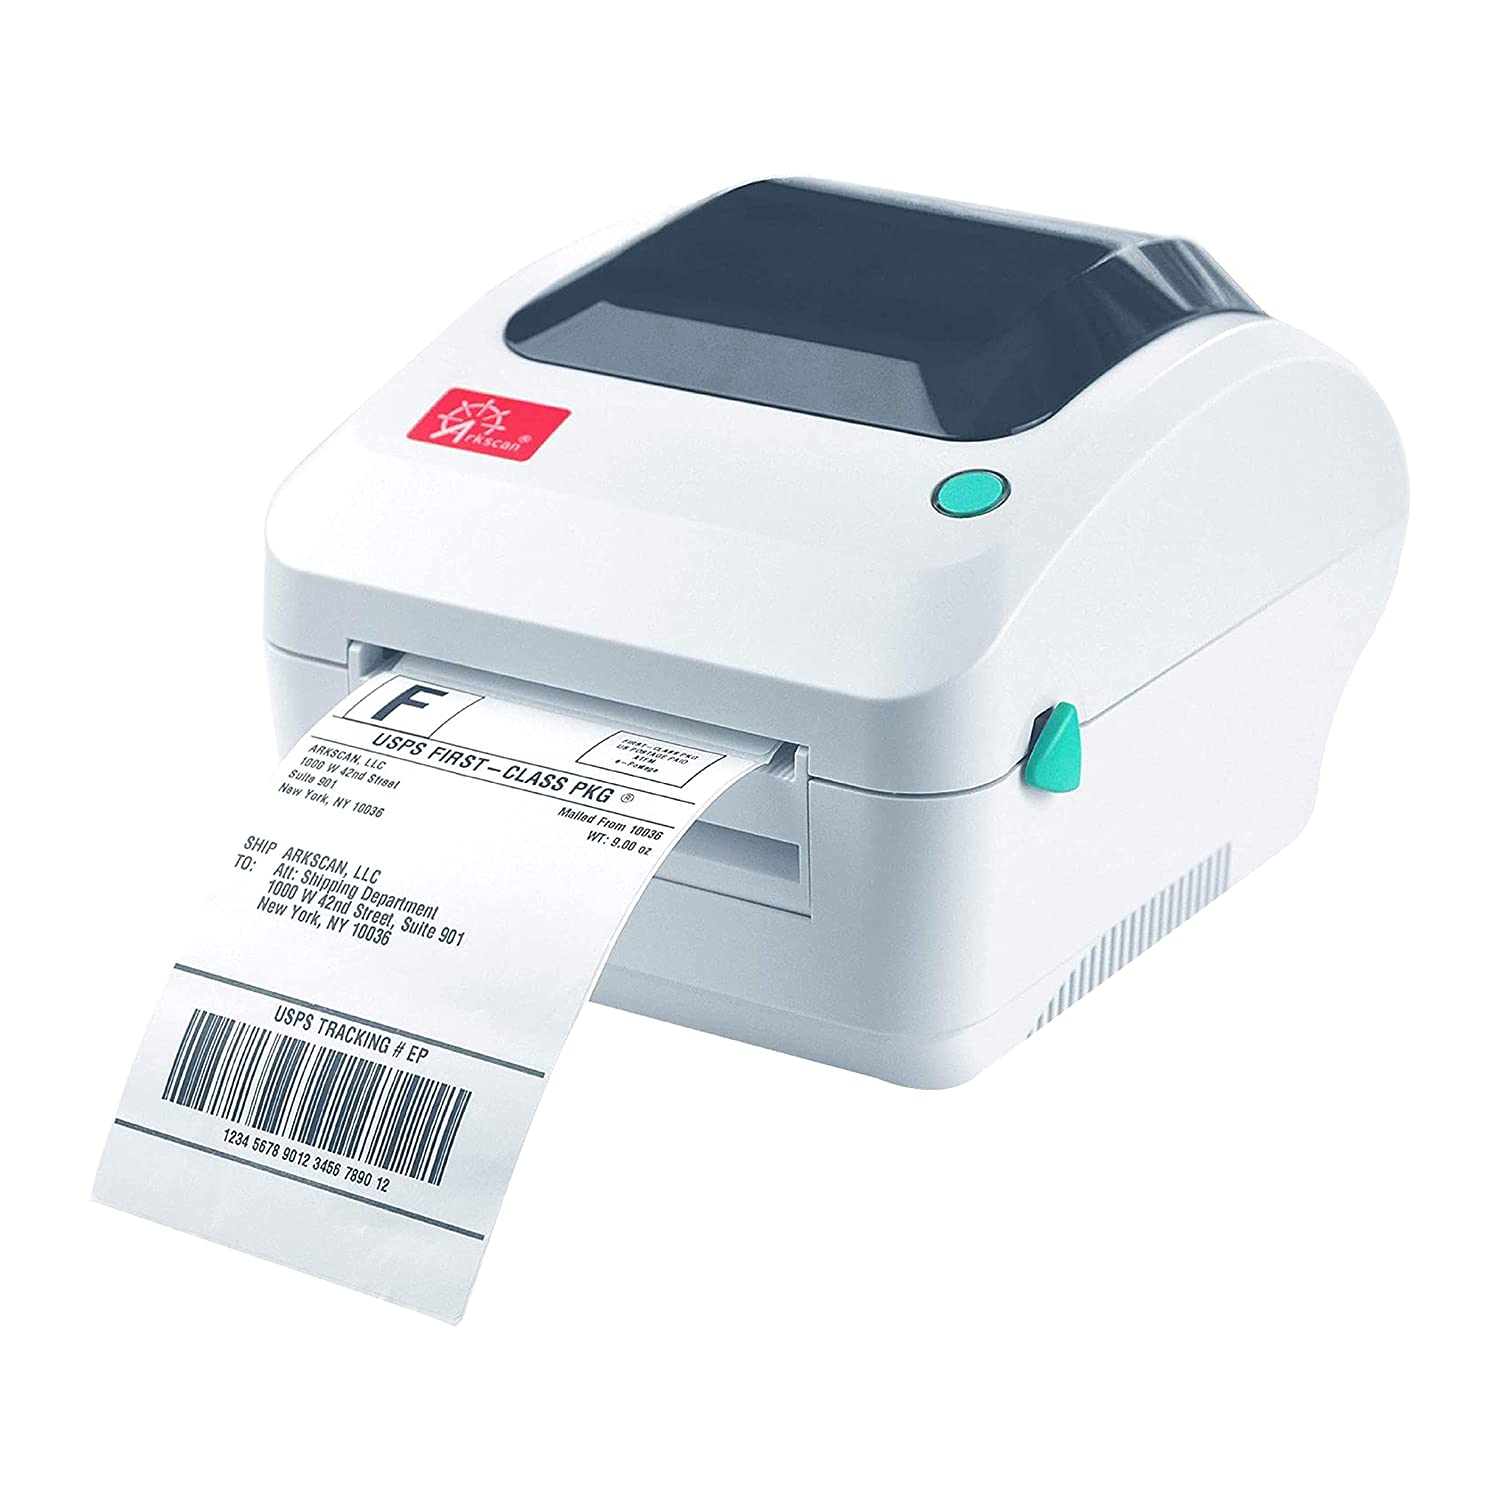 Arkscan 2054A Shipping Label Printer for Windows Mac Chromebook Linux, Supports Amazon Ebay Paypal Etsy Shopify ShipStation Stamps.com UPS USPS Fed...